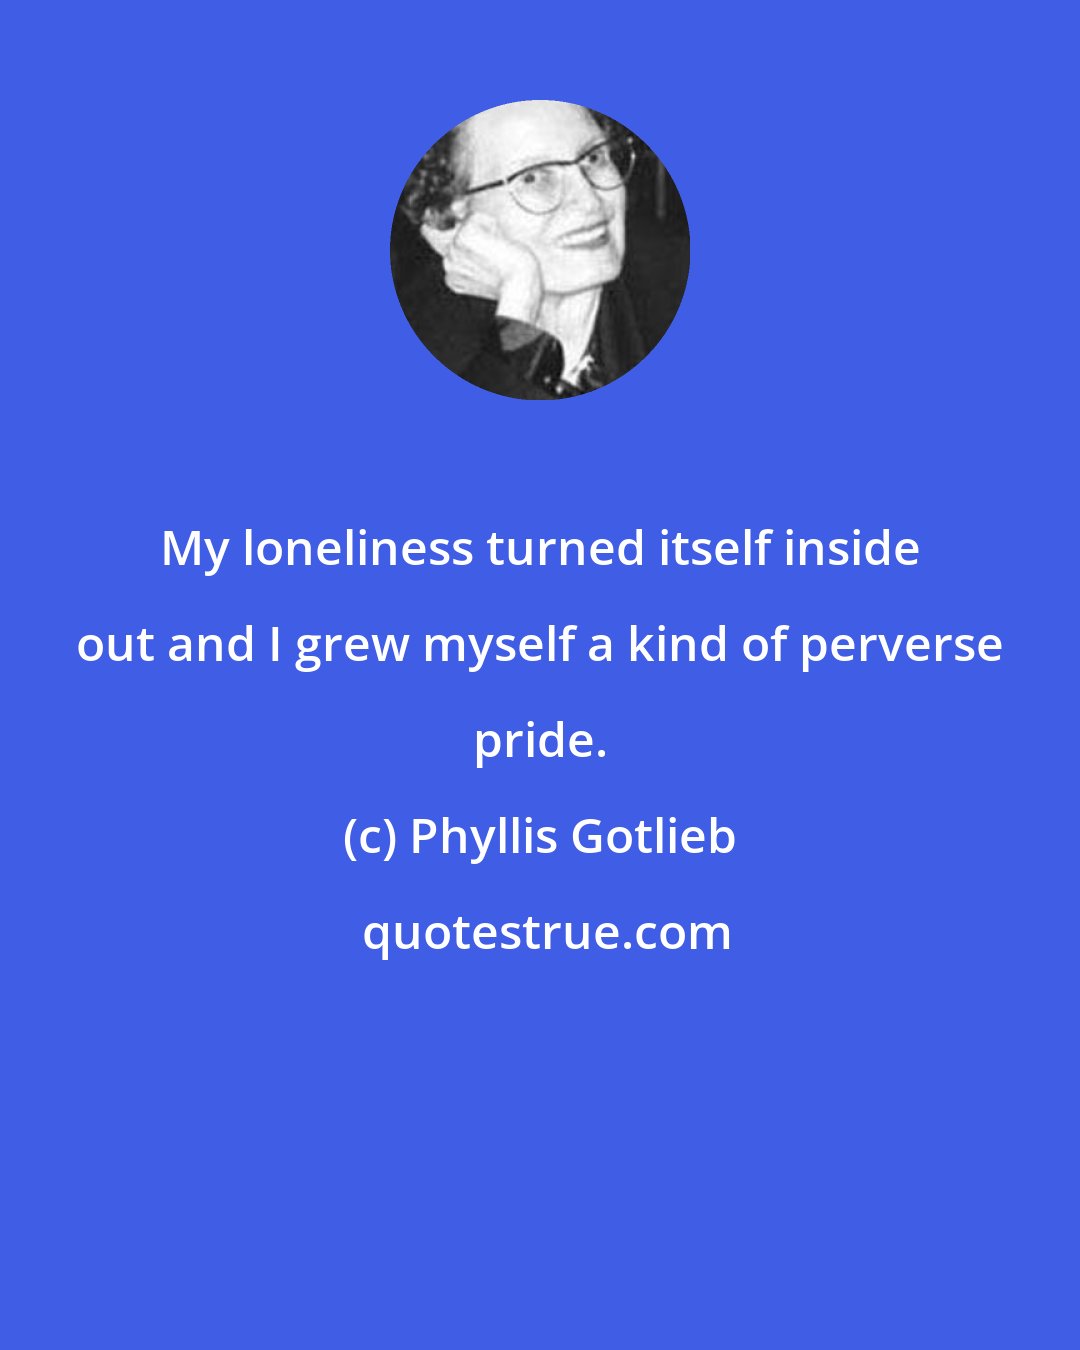 Phyllis Gotlieb: My loneliness turned itself inside out and I grew myself a kind of perverse pride.